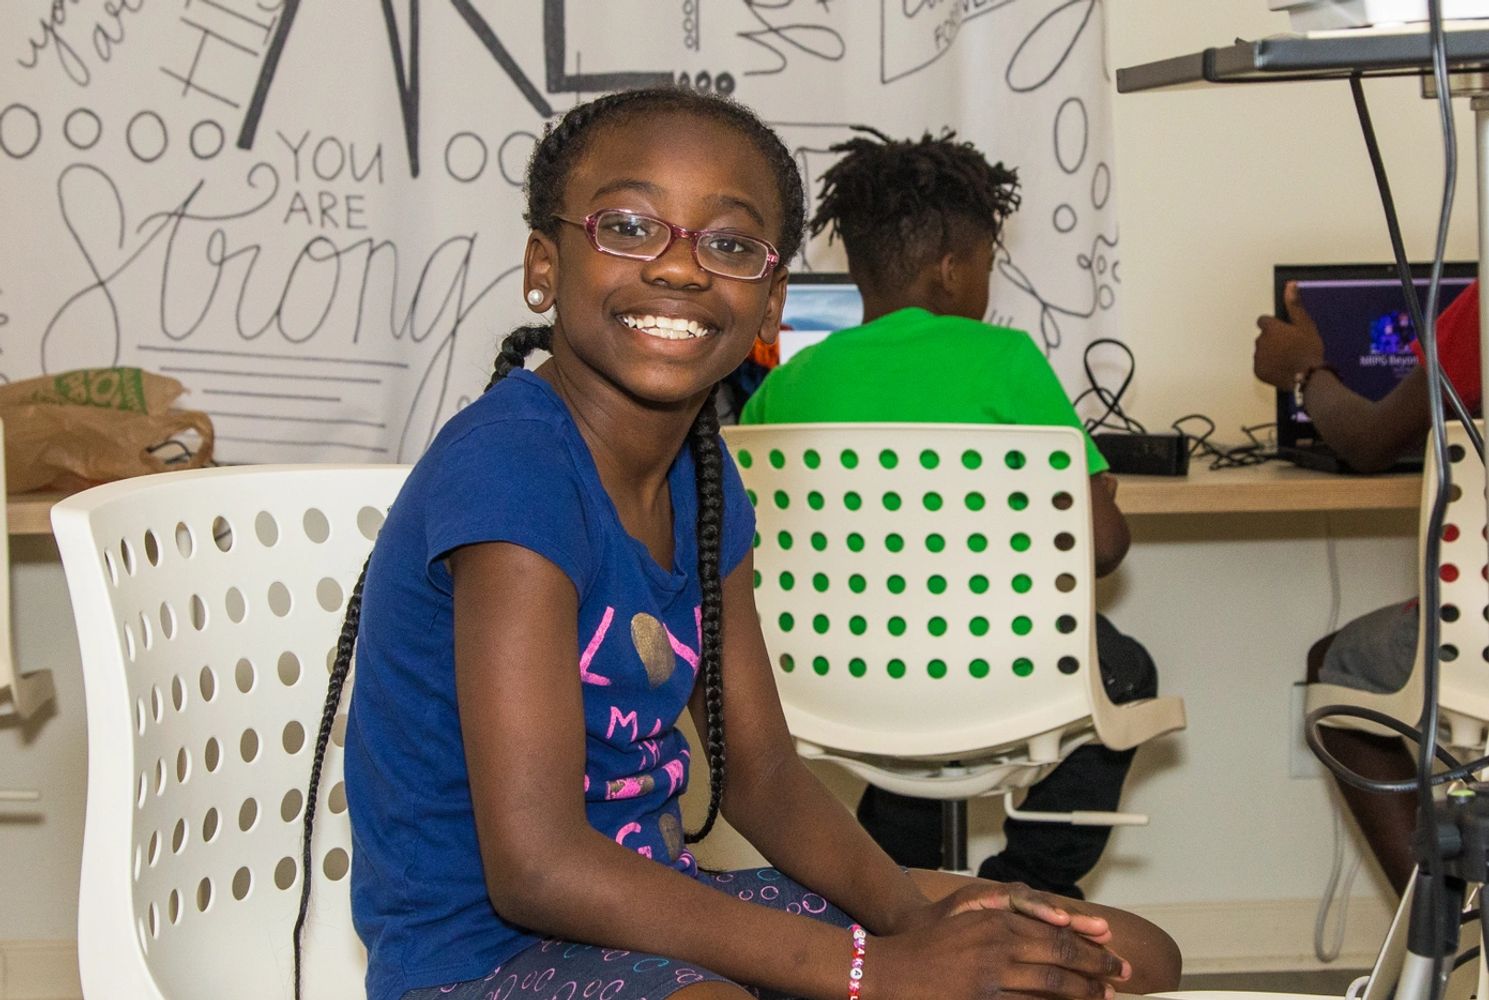 A young girl smiling at the camera and working on a laptop in the community center